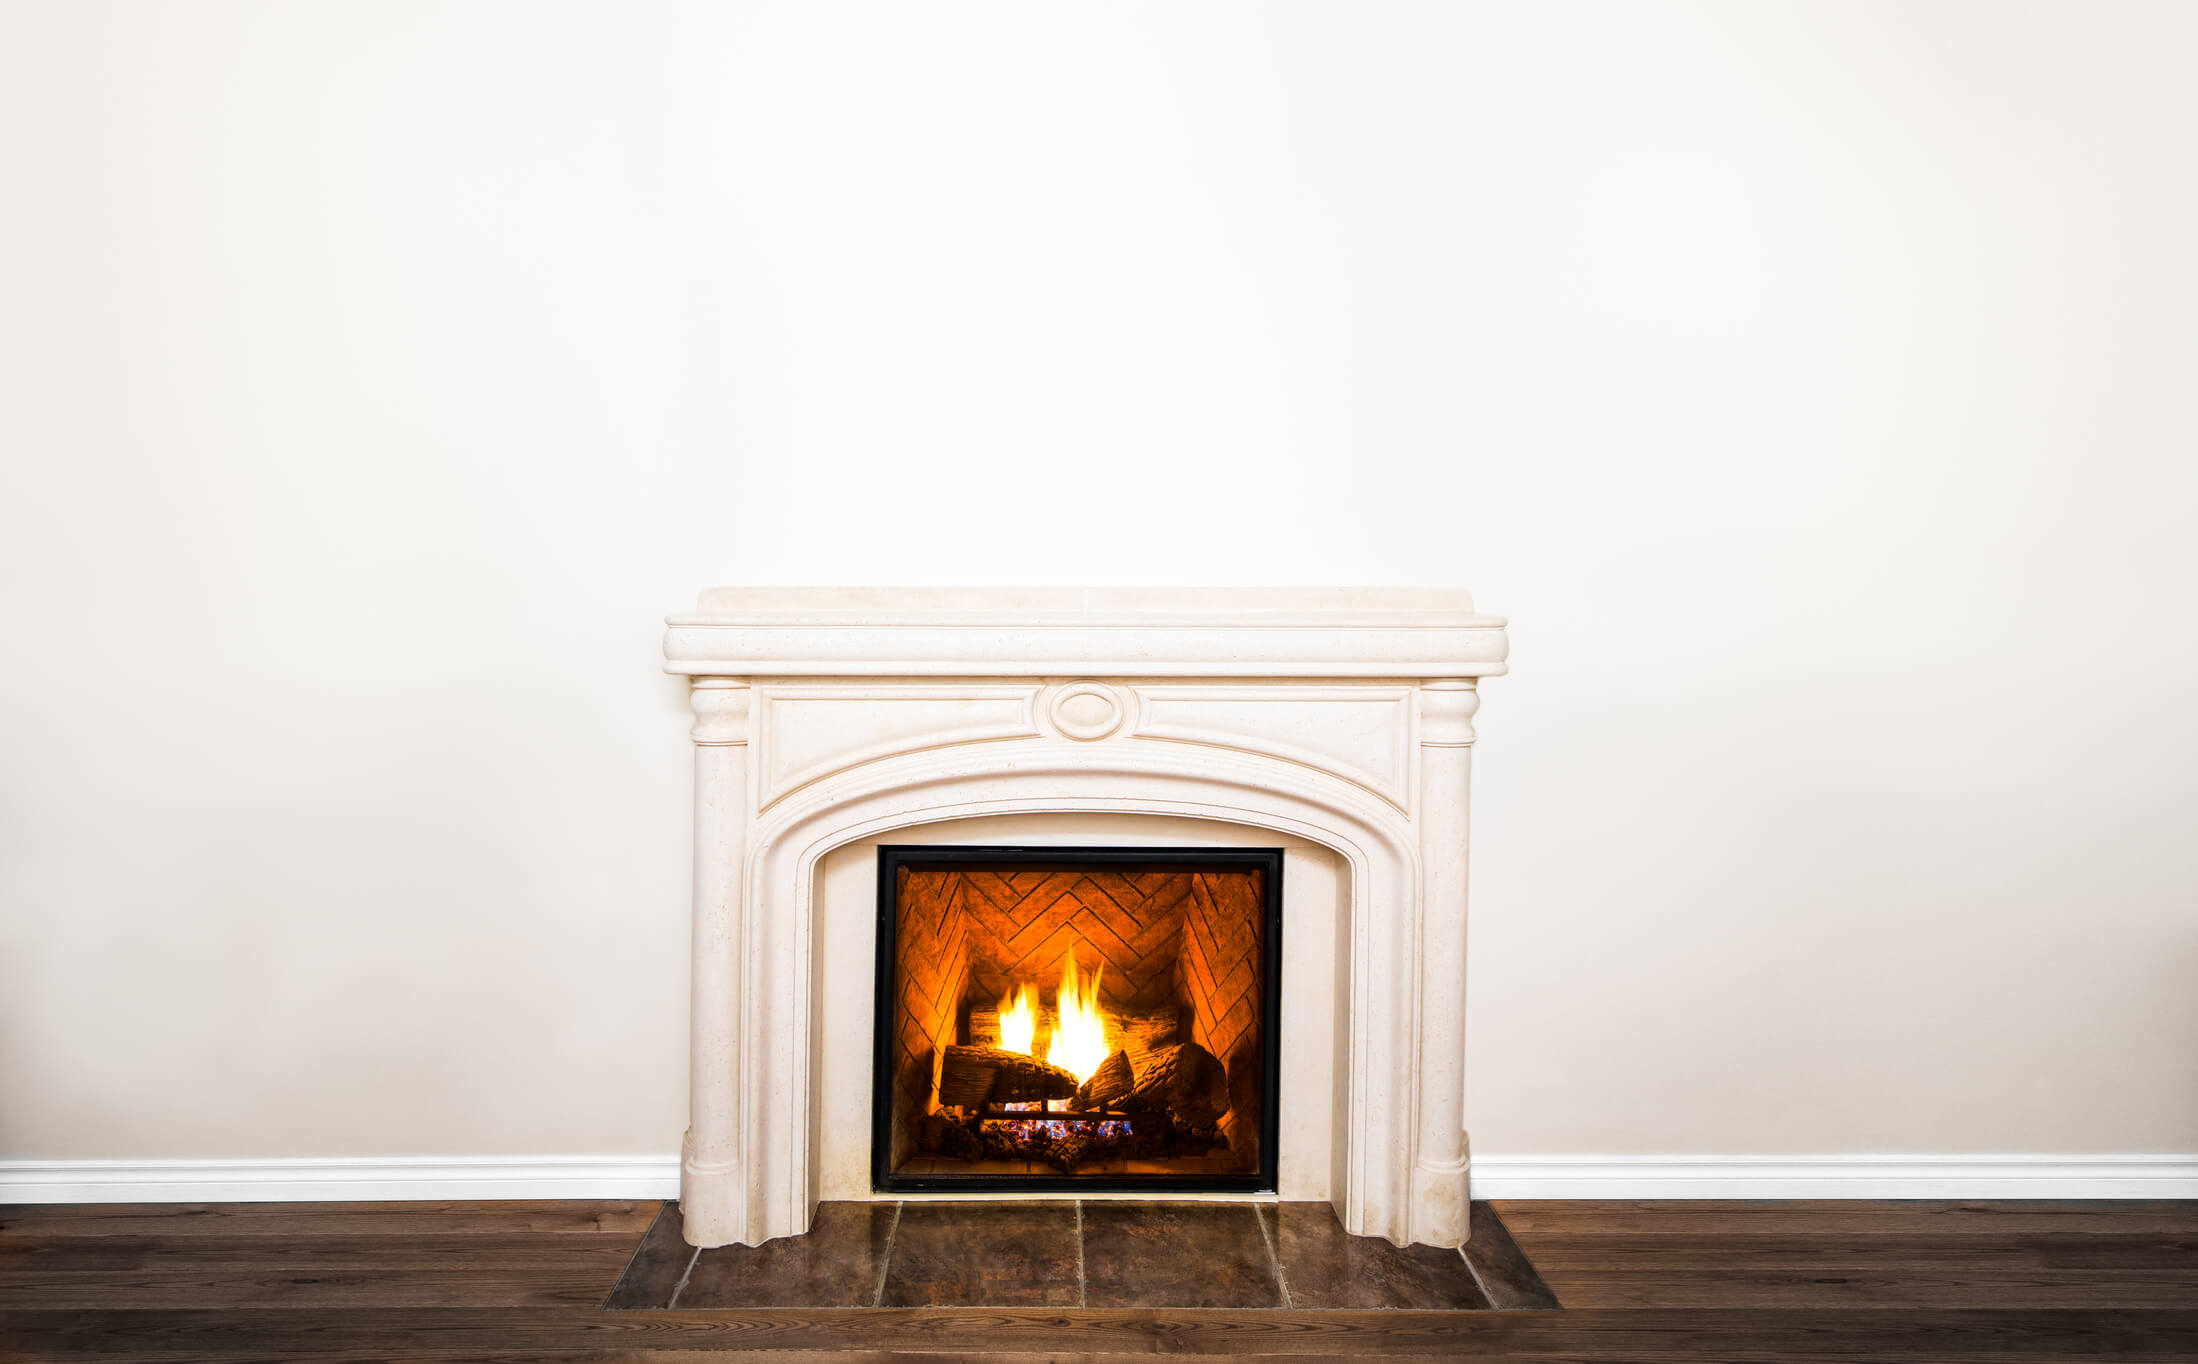 Luxurious White Marble Fireplace and empty wall